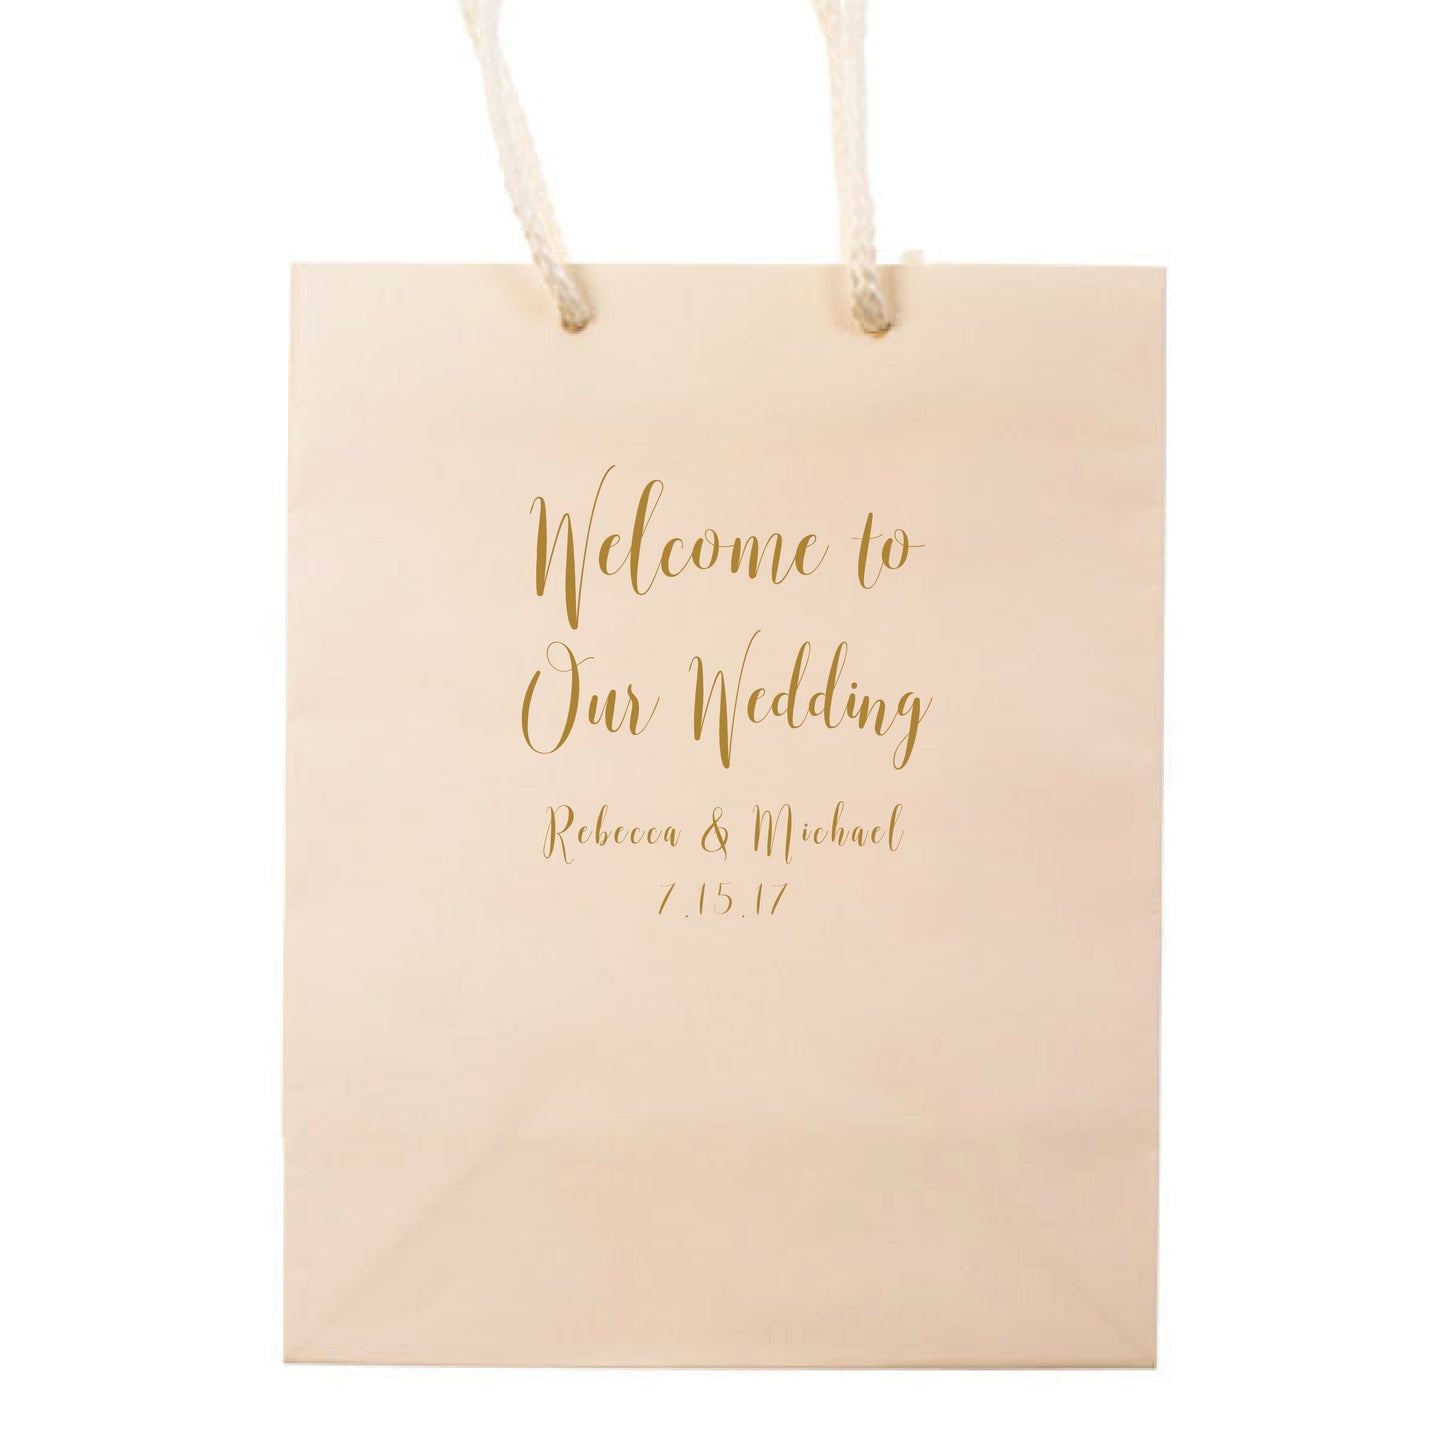 Personalized Welcome to our Wedding Bags - Monica Collection - Tea and Becky